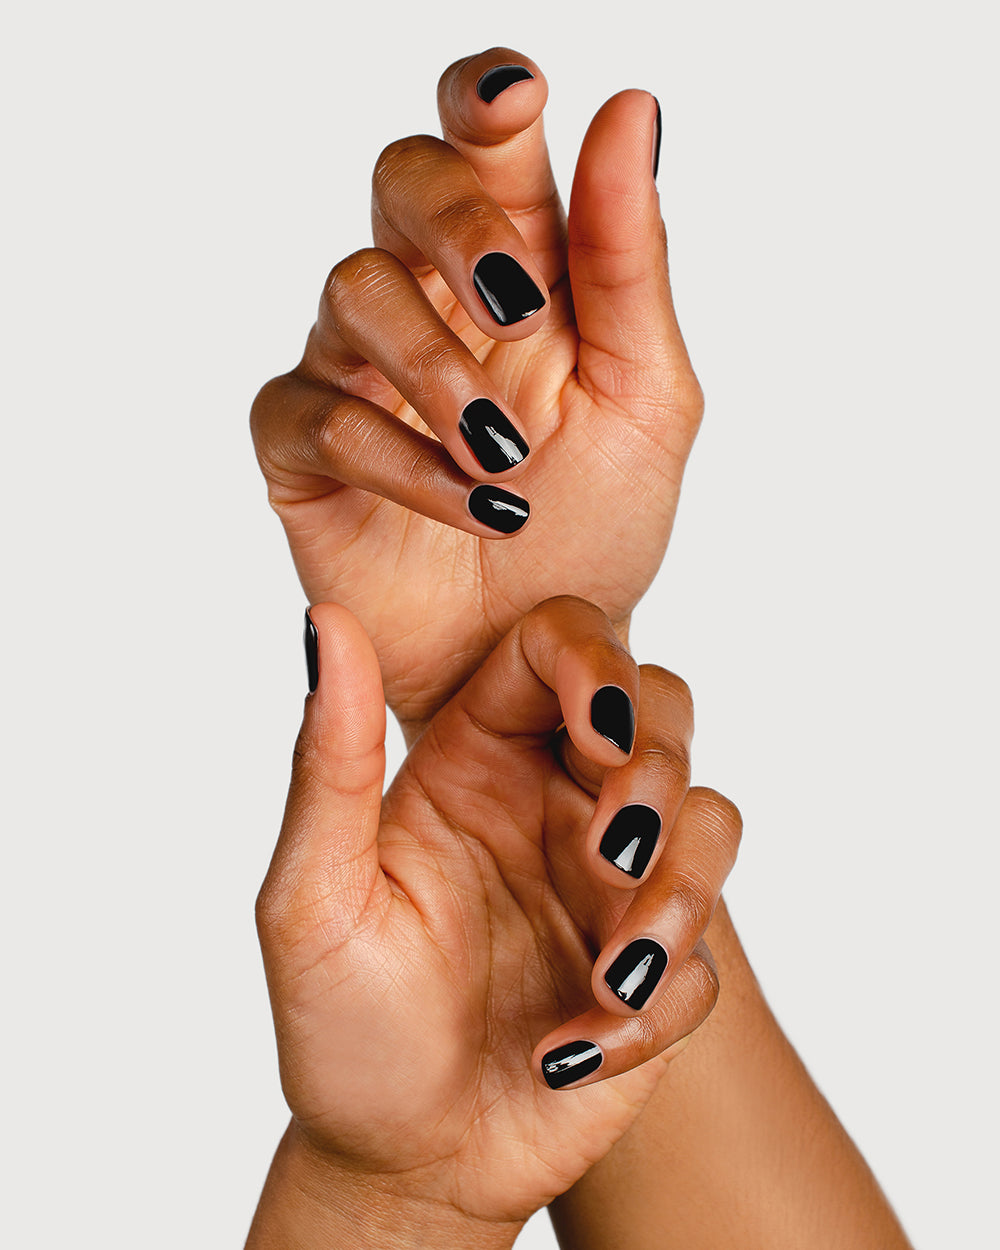 jet black nail polish hand swatch on medium skin tone, two hands, one above the other